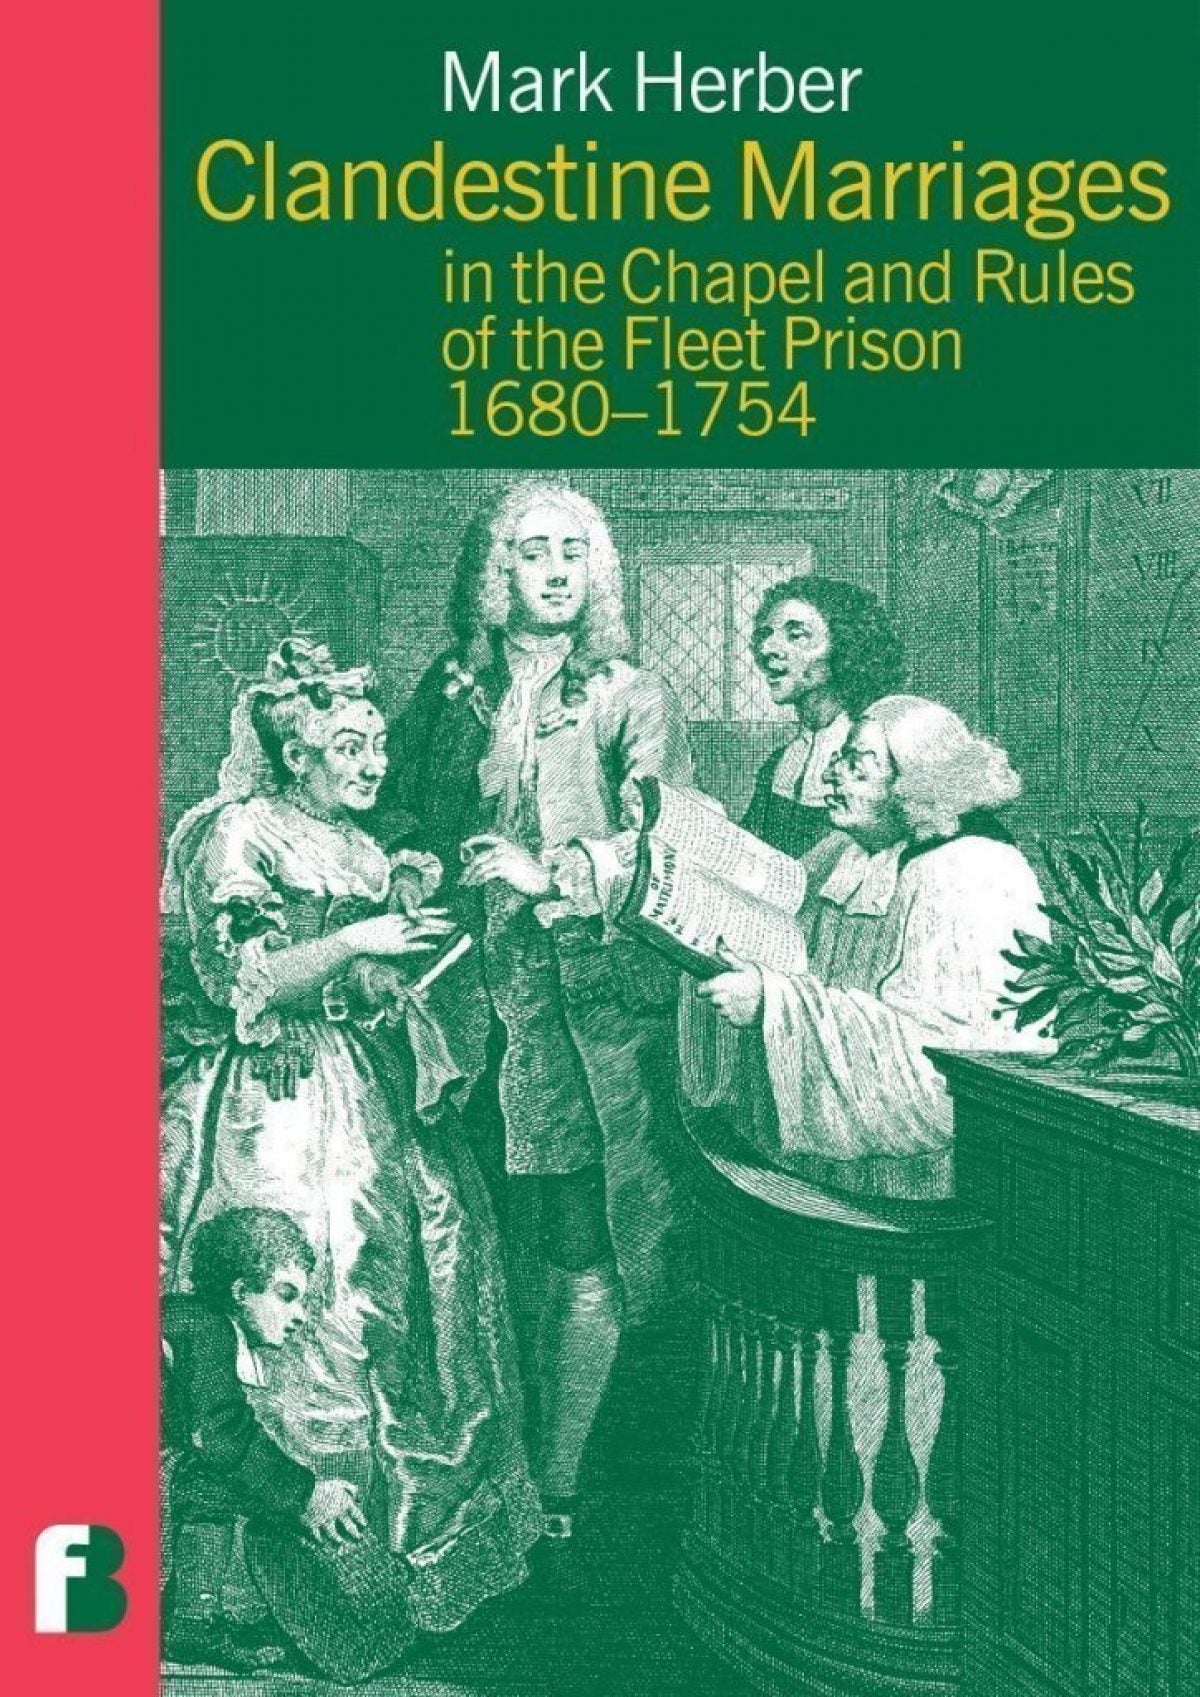 Clandestine Marriages in the Chapel and Rules of the Fleet Prison 1680-1754 : v. 1